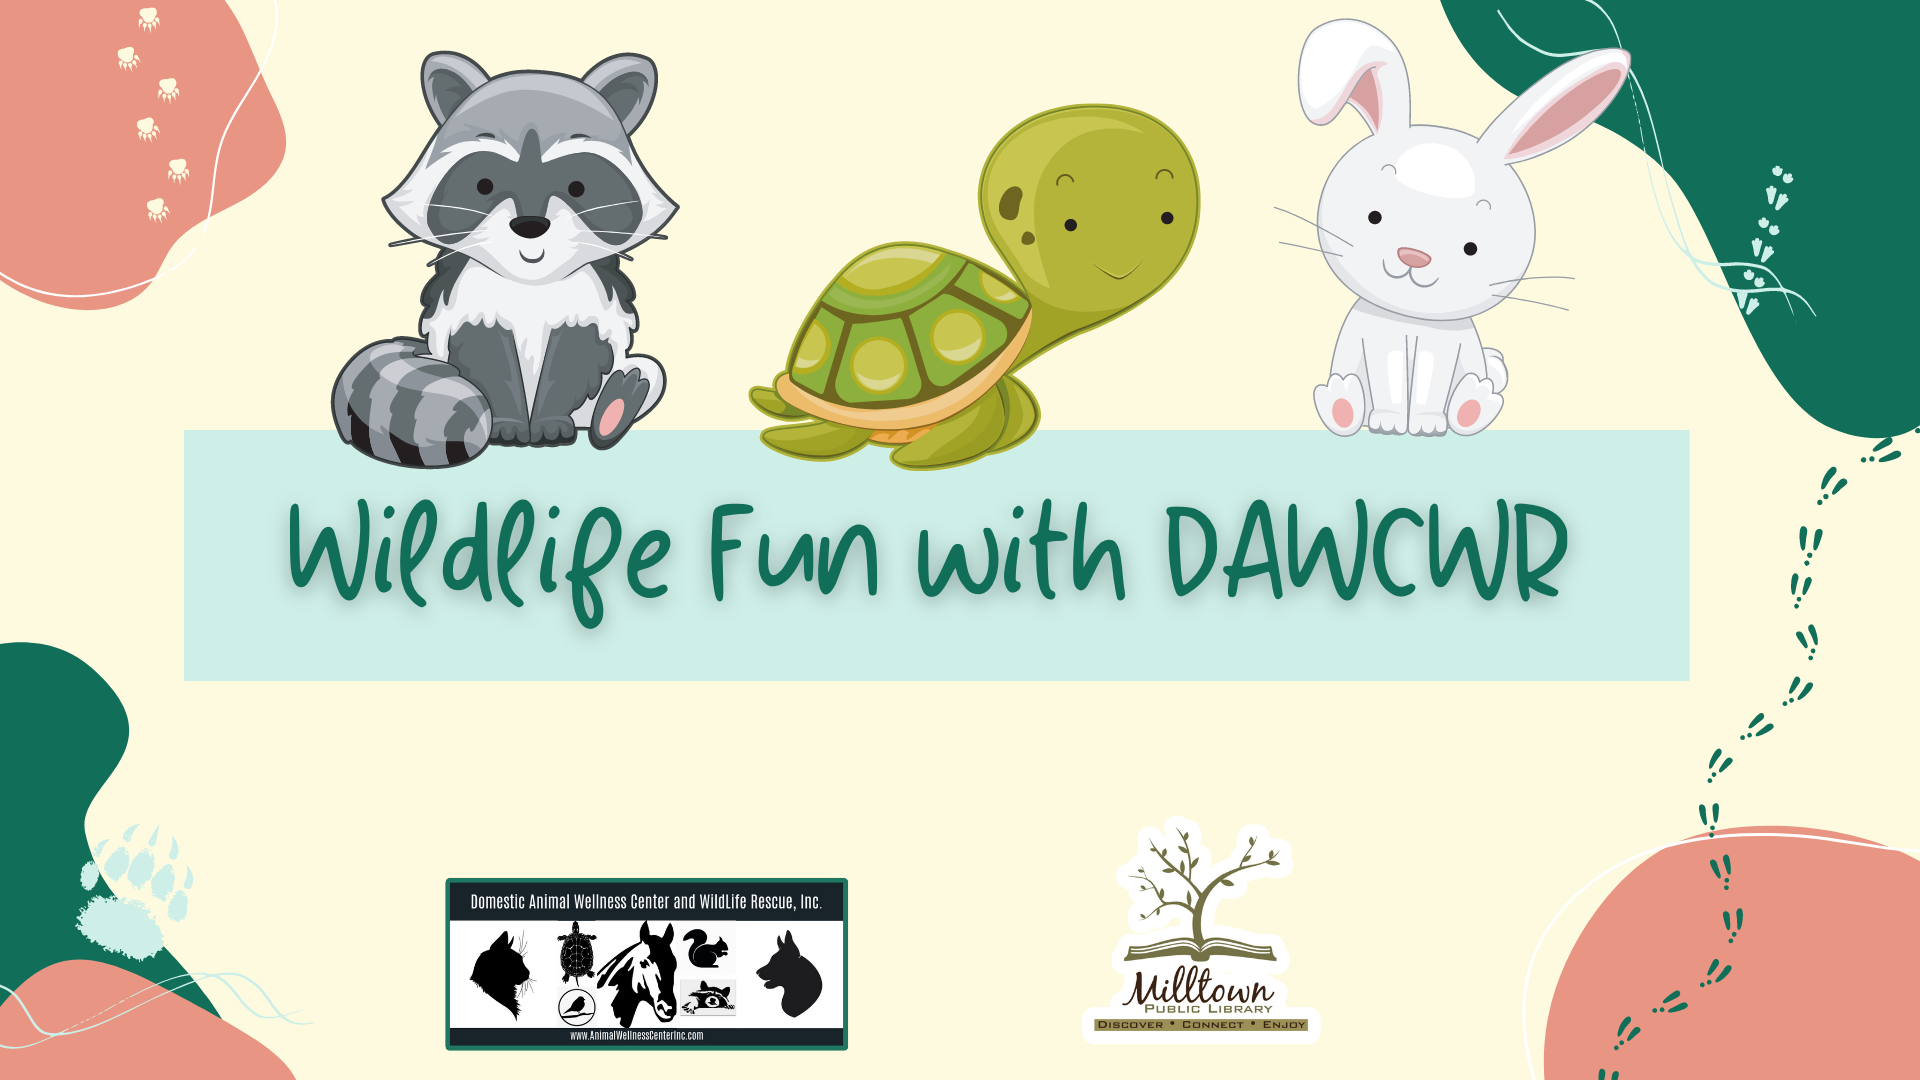 Image with raccoon, turtle and bunny illustrion including the text Wildlife Fun with DAWCWR